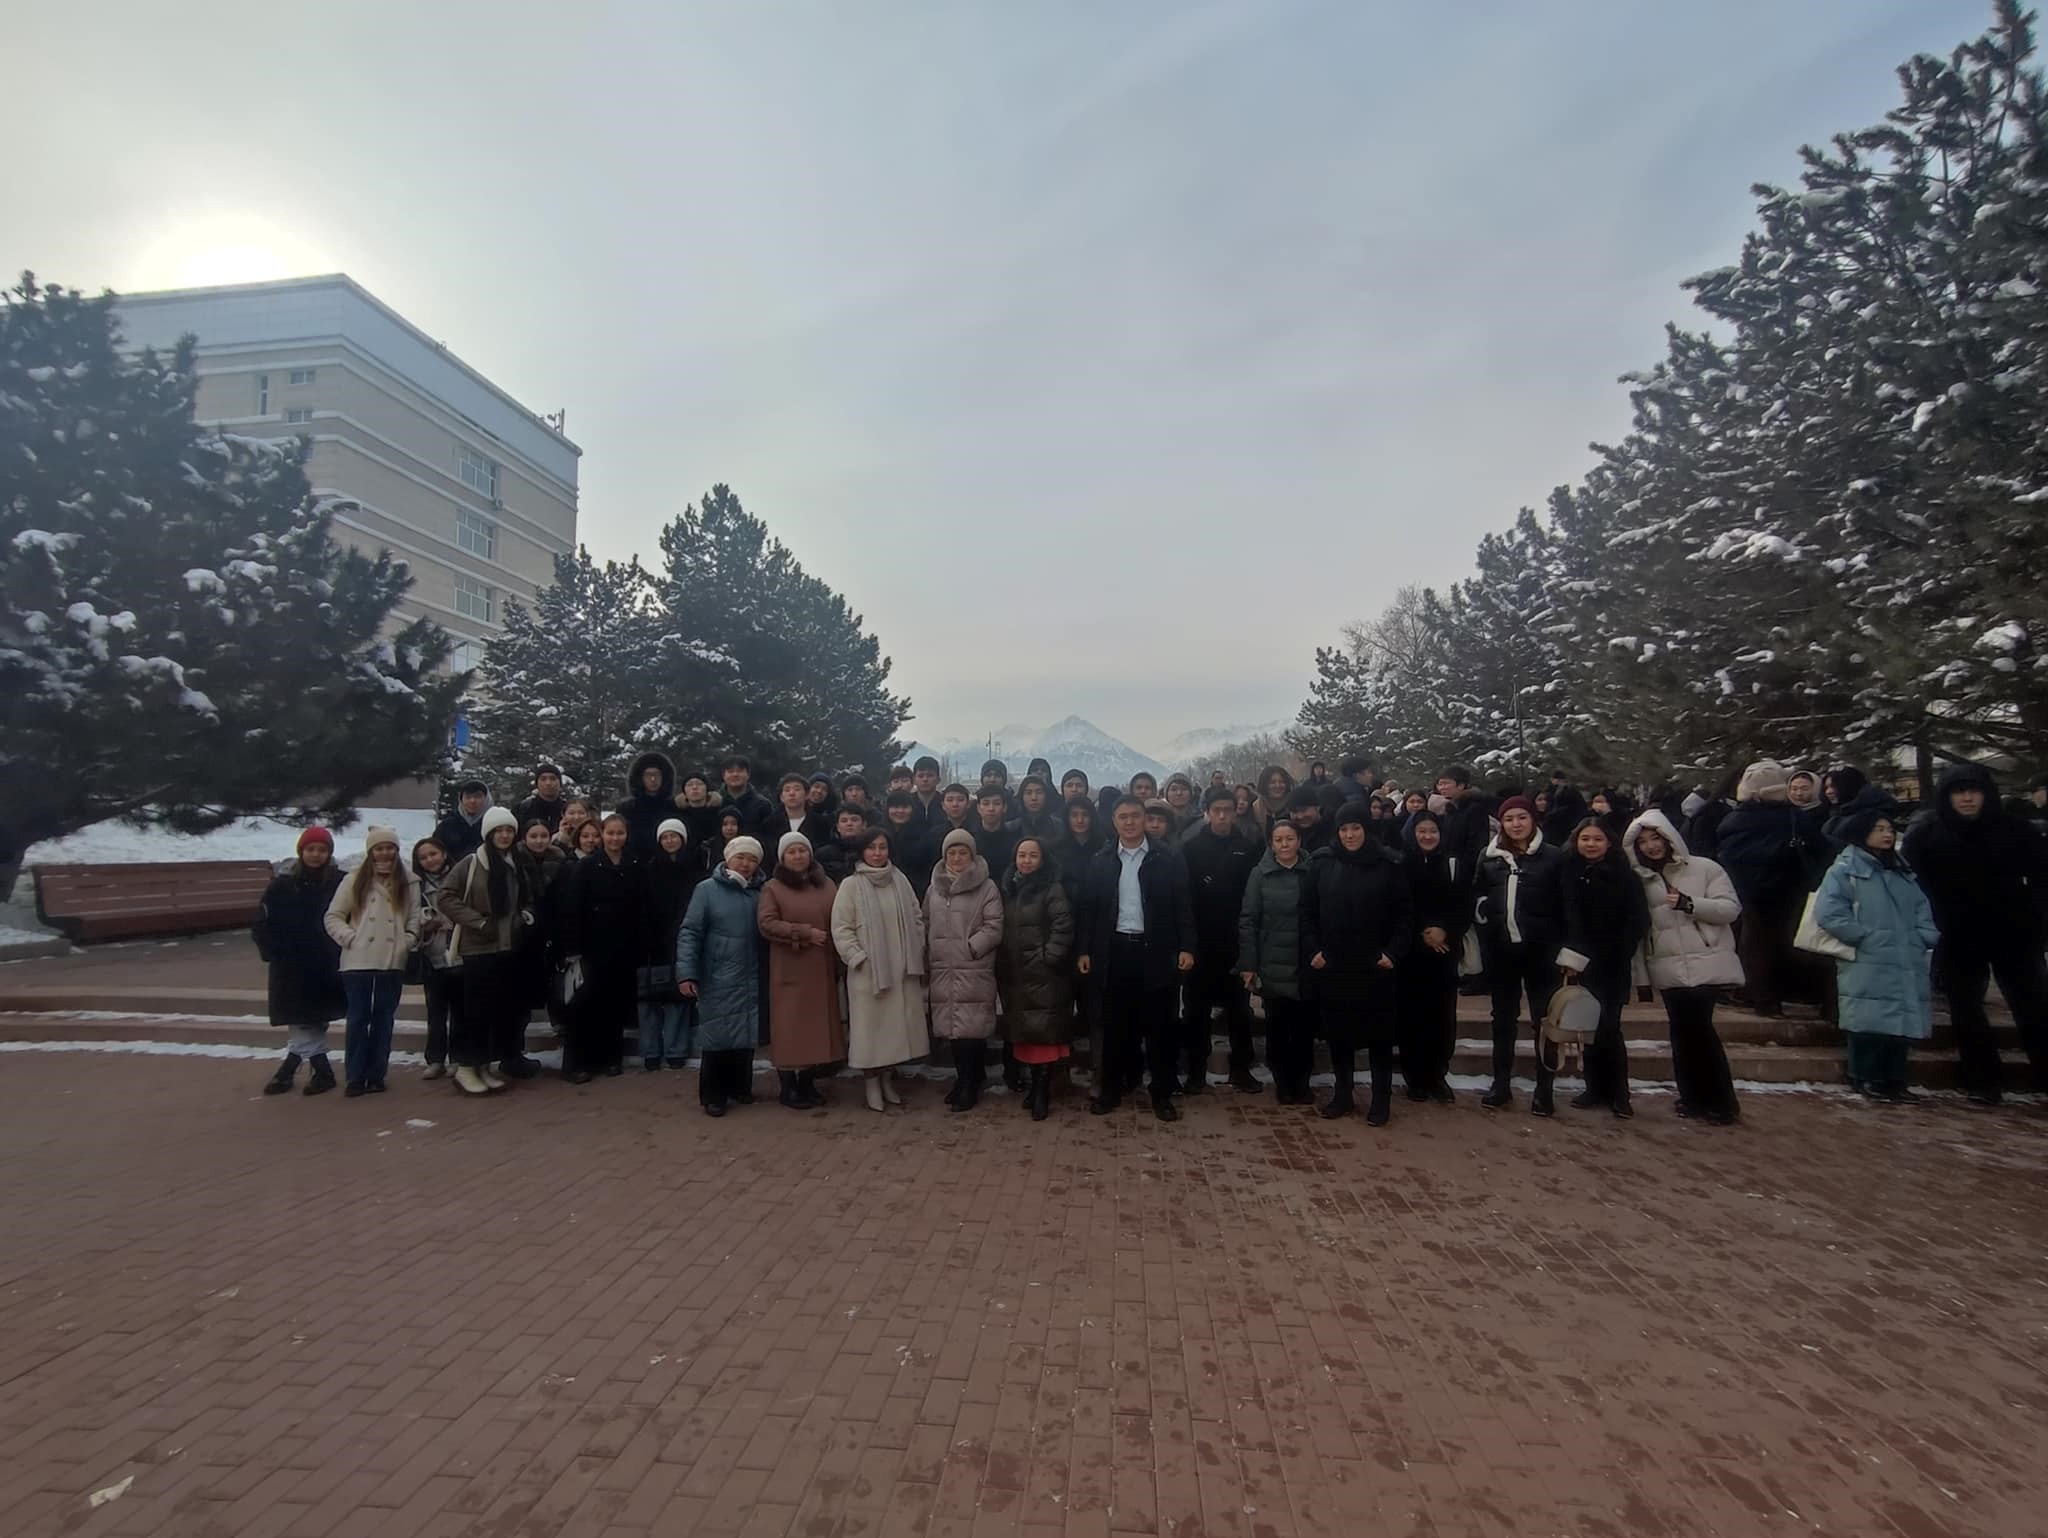 STUDENTS OF THE DEPARTMENT OF CARTOGRAPHY AND GEOINFORMATICS TOOK PART IN URBAN SEISMIC EXERCISES